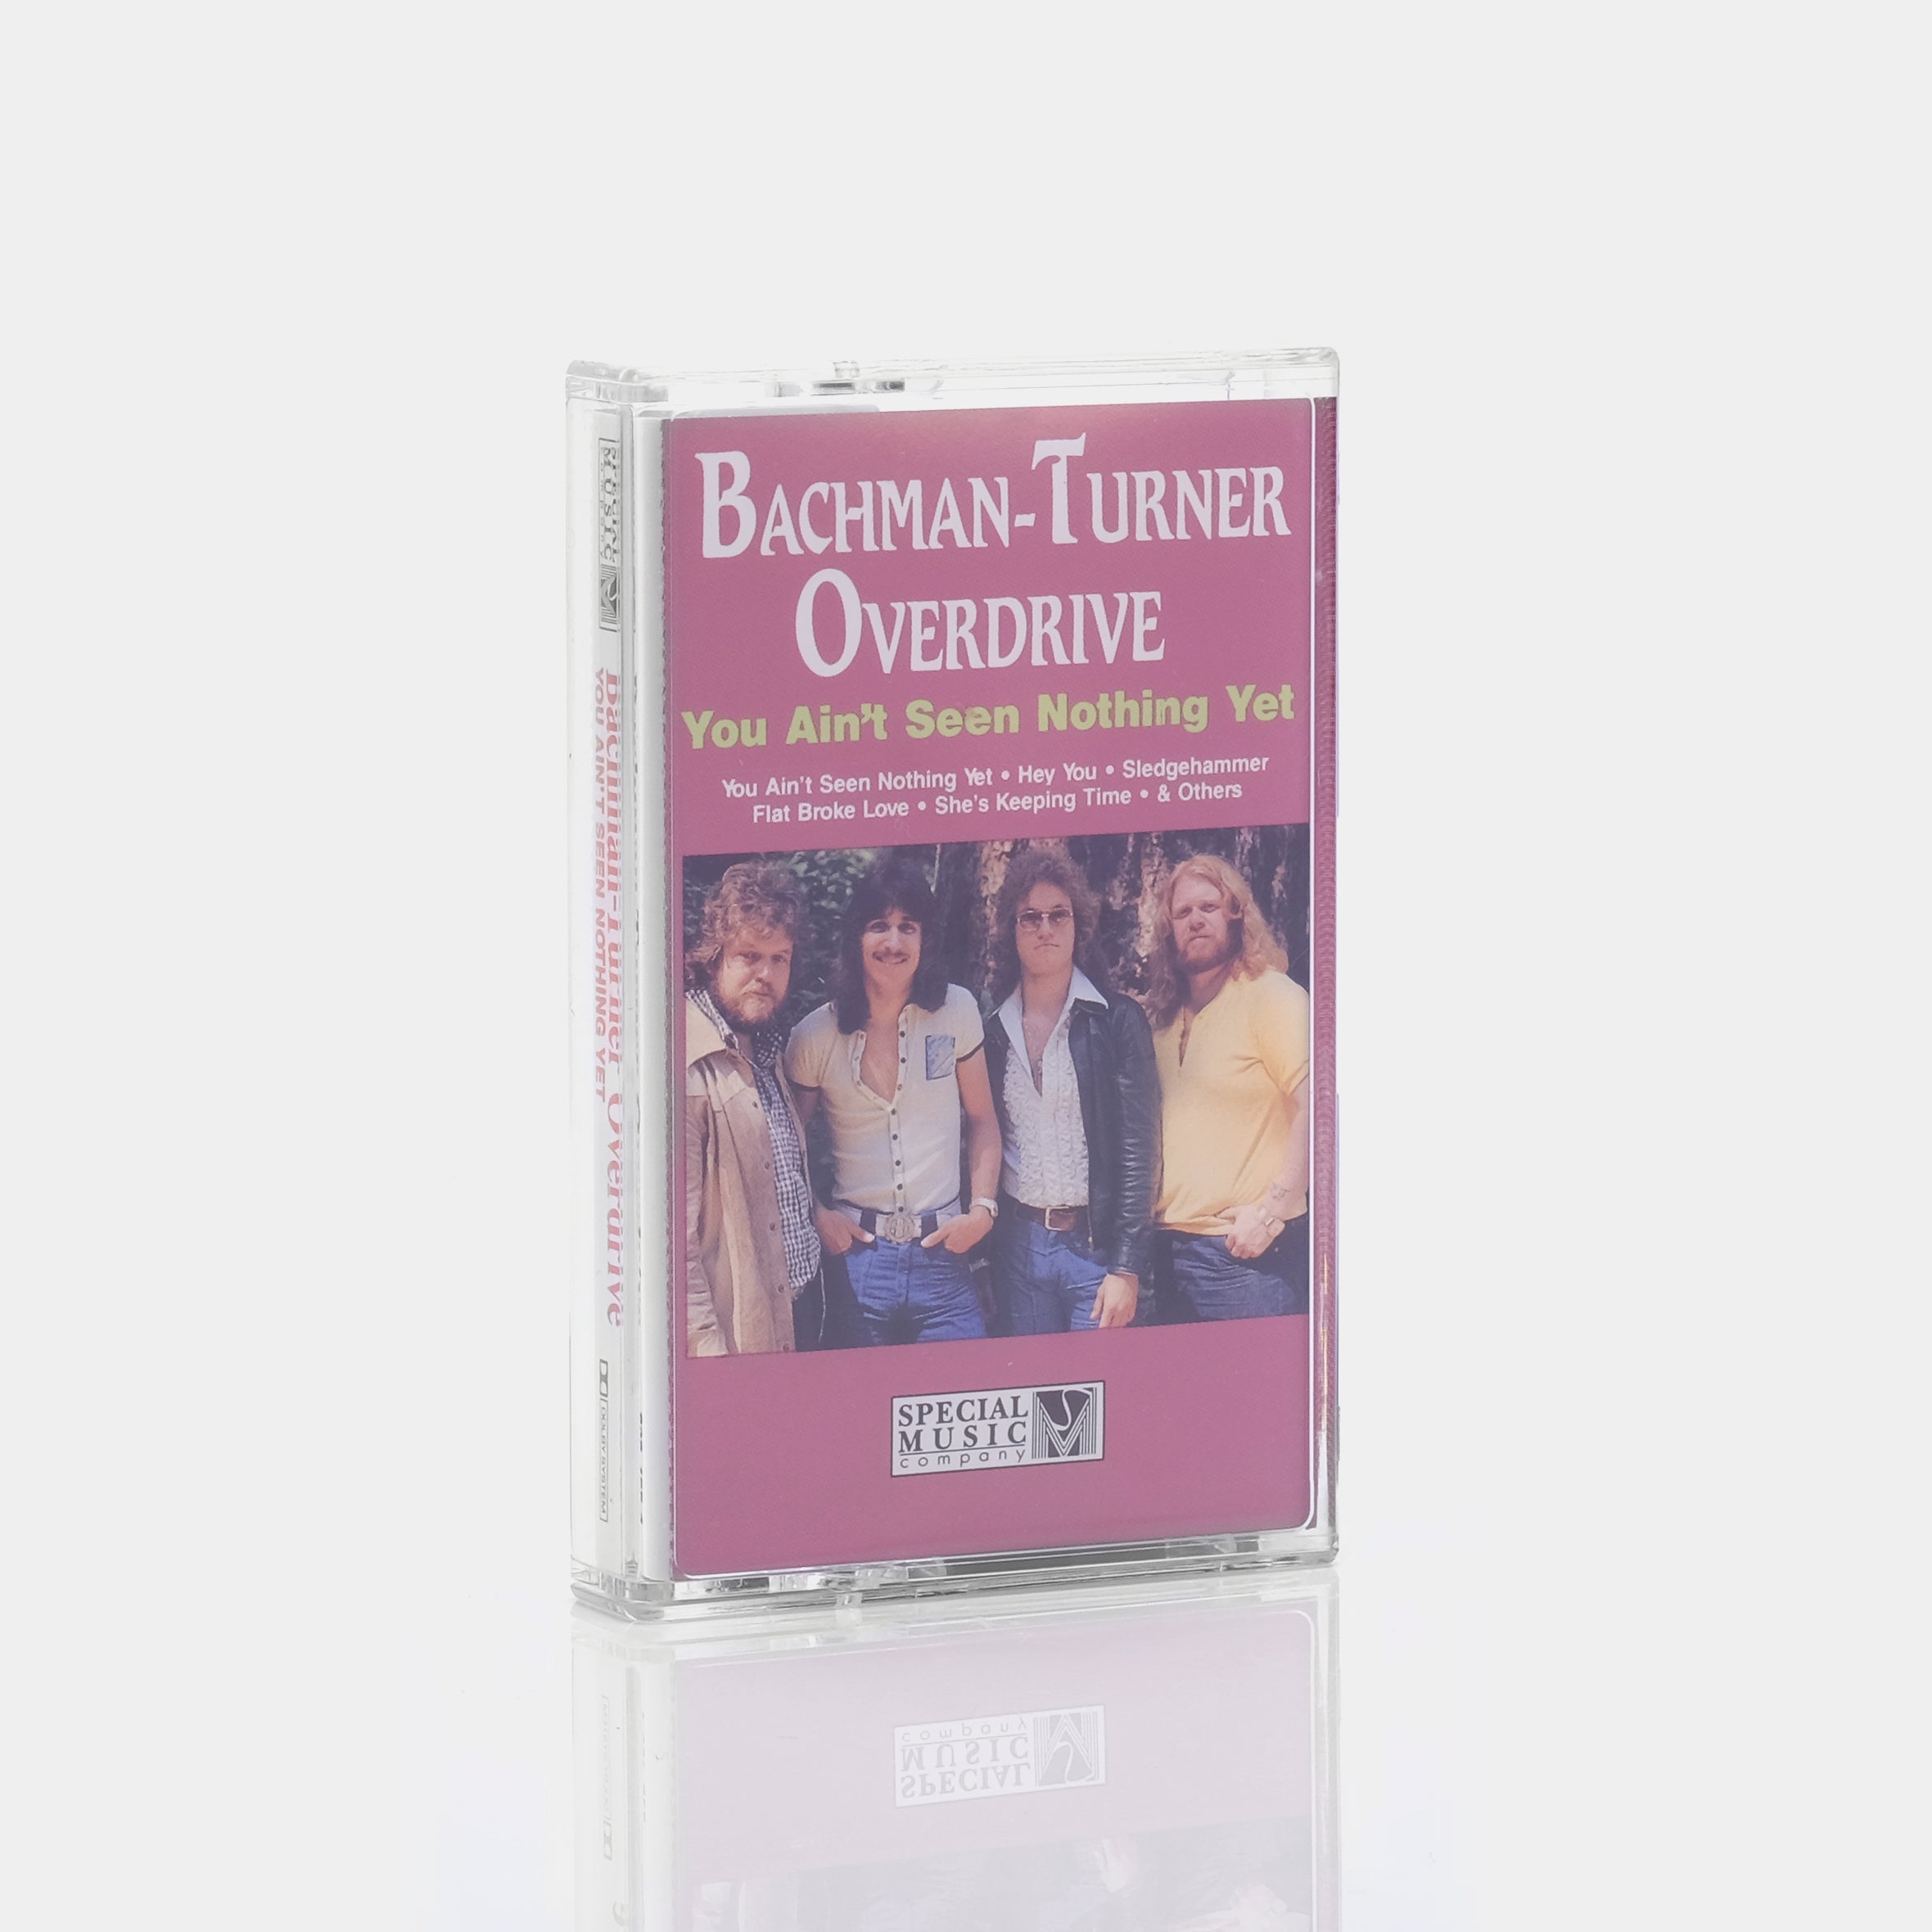 Bachman-Turner Overdrive - You Ain't Seen Nothing Yet Cassette Tape